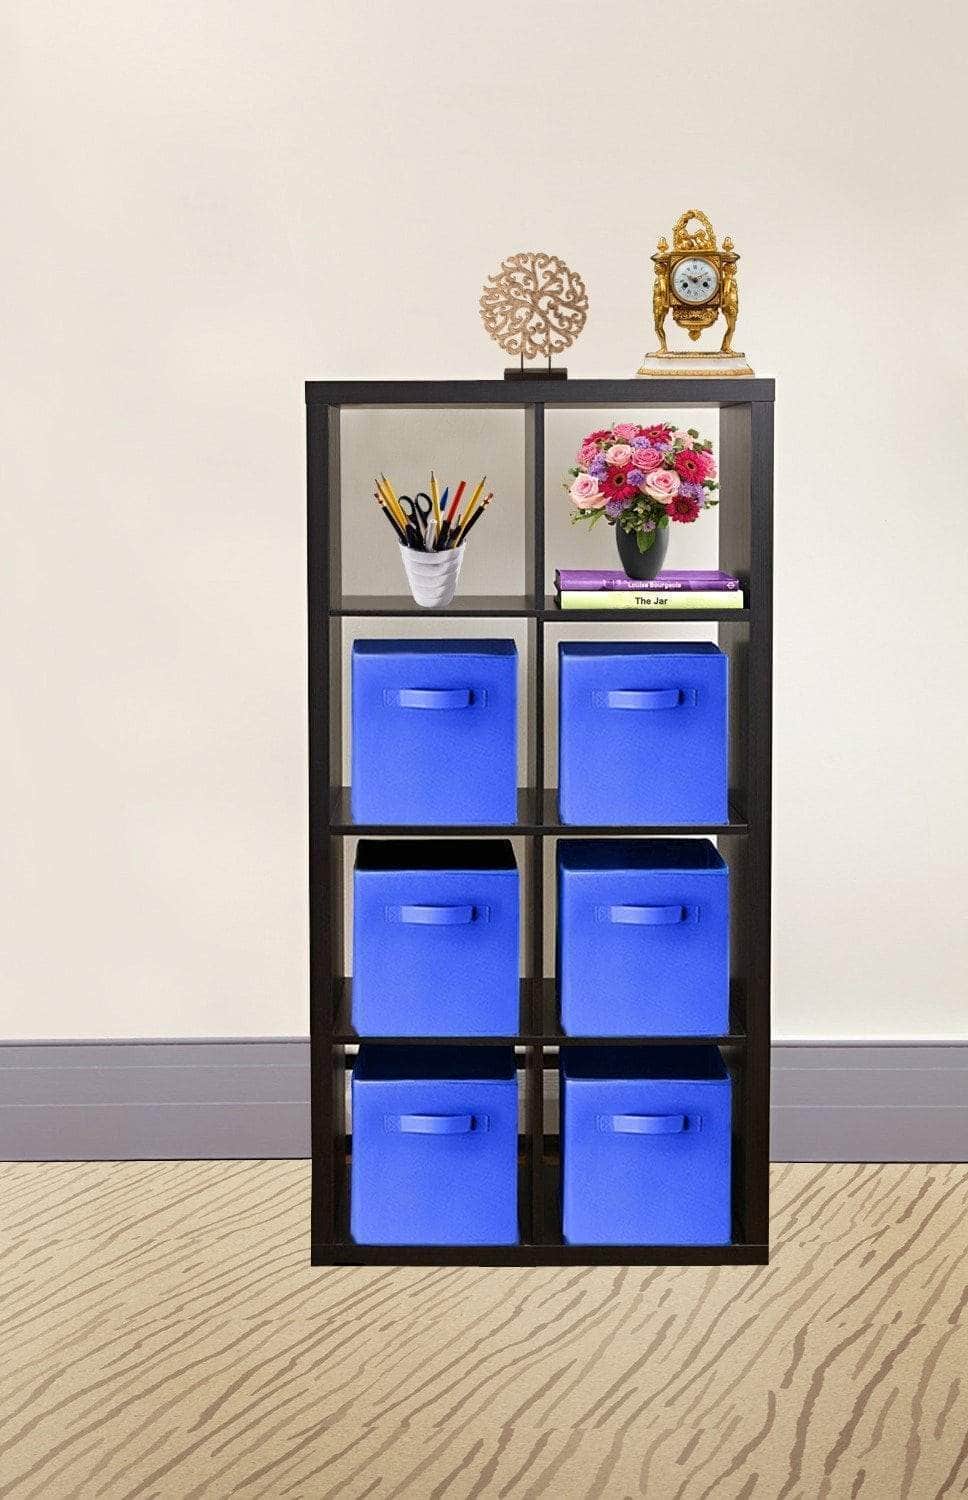 Top 30 pack blue storage cubes with two handles shelves baskets bins containers home decorative closet organizer household fabric cloth collapsible box toys storages drawer blue 30 pack